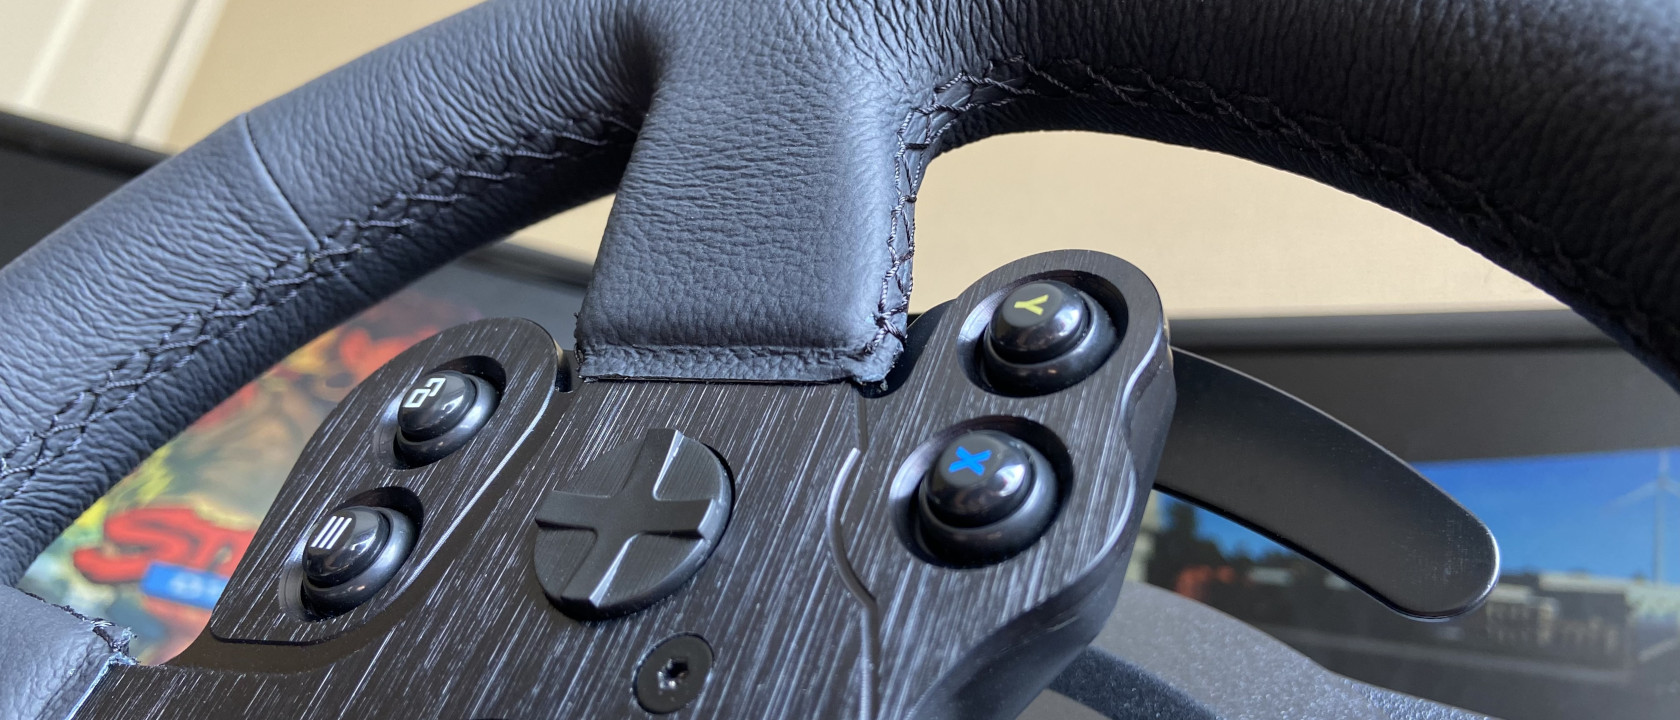 Thrustmaster TX leather edition racing wheel review: Smooth and